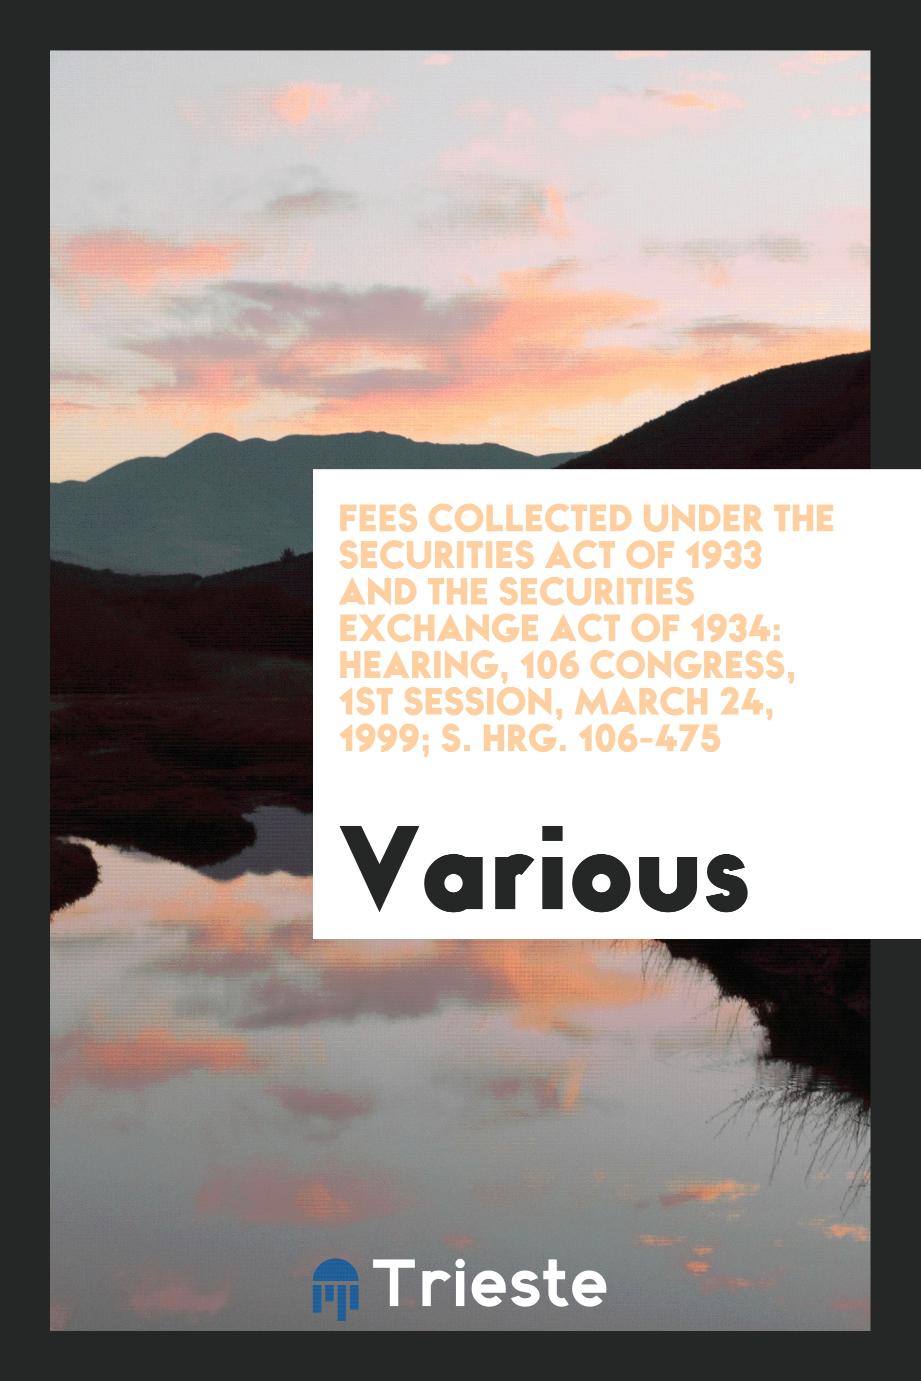 Fees collected under the Securities Act of 1933 and the Securities Exchange Act of 1934: hearing, 106 Congress, 1st Session, March 24, 1999; S. Hrg. 106-475